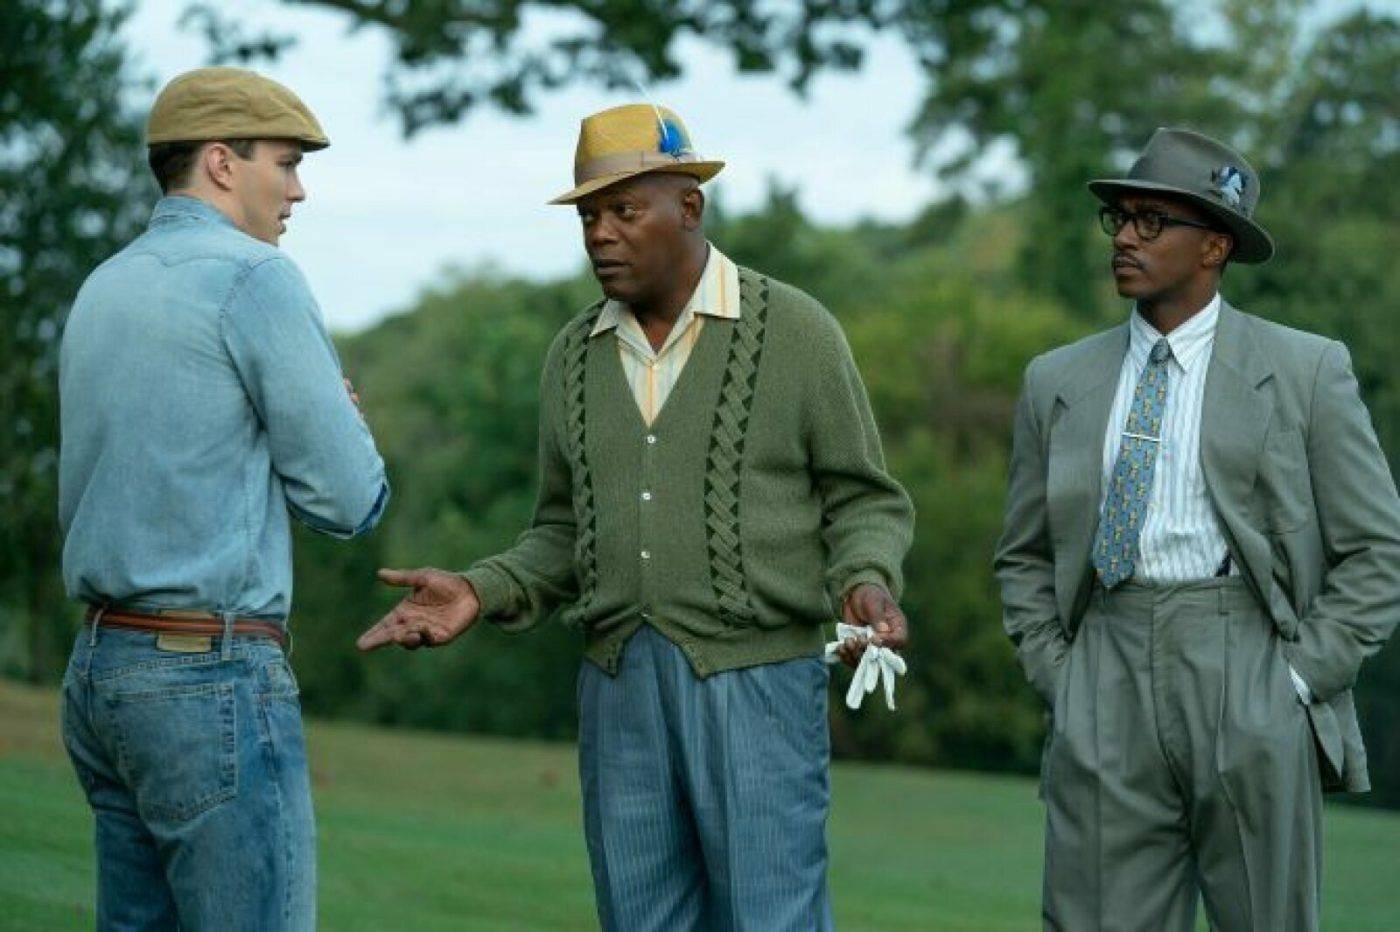 Nicholas Hoult, left, Samuel L. Jackson, center, and Anthony Mackie are seen in this still image taken from the movie 'The Banker'. — Courtesy photo